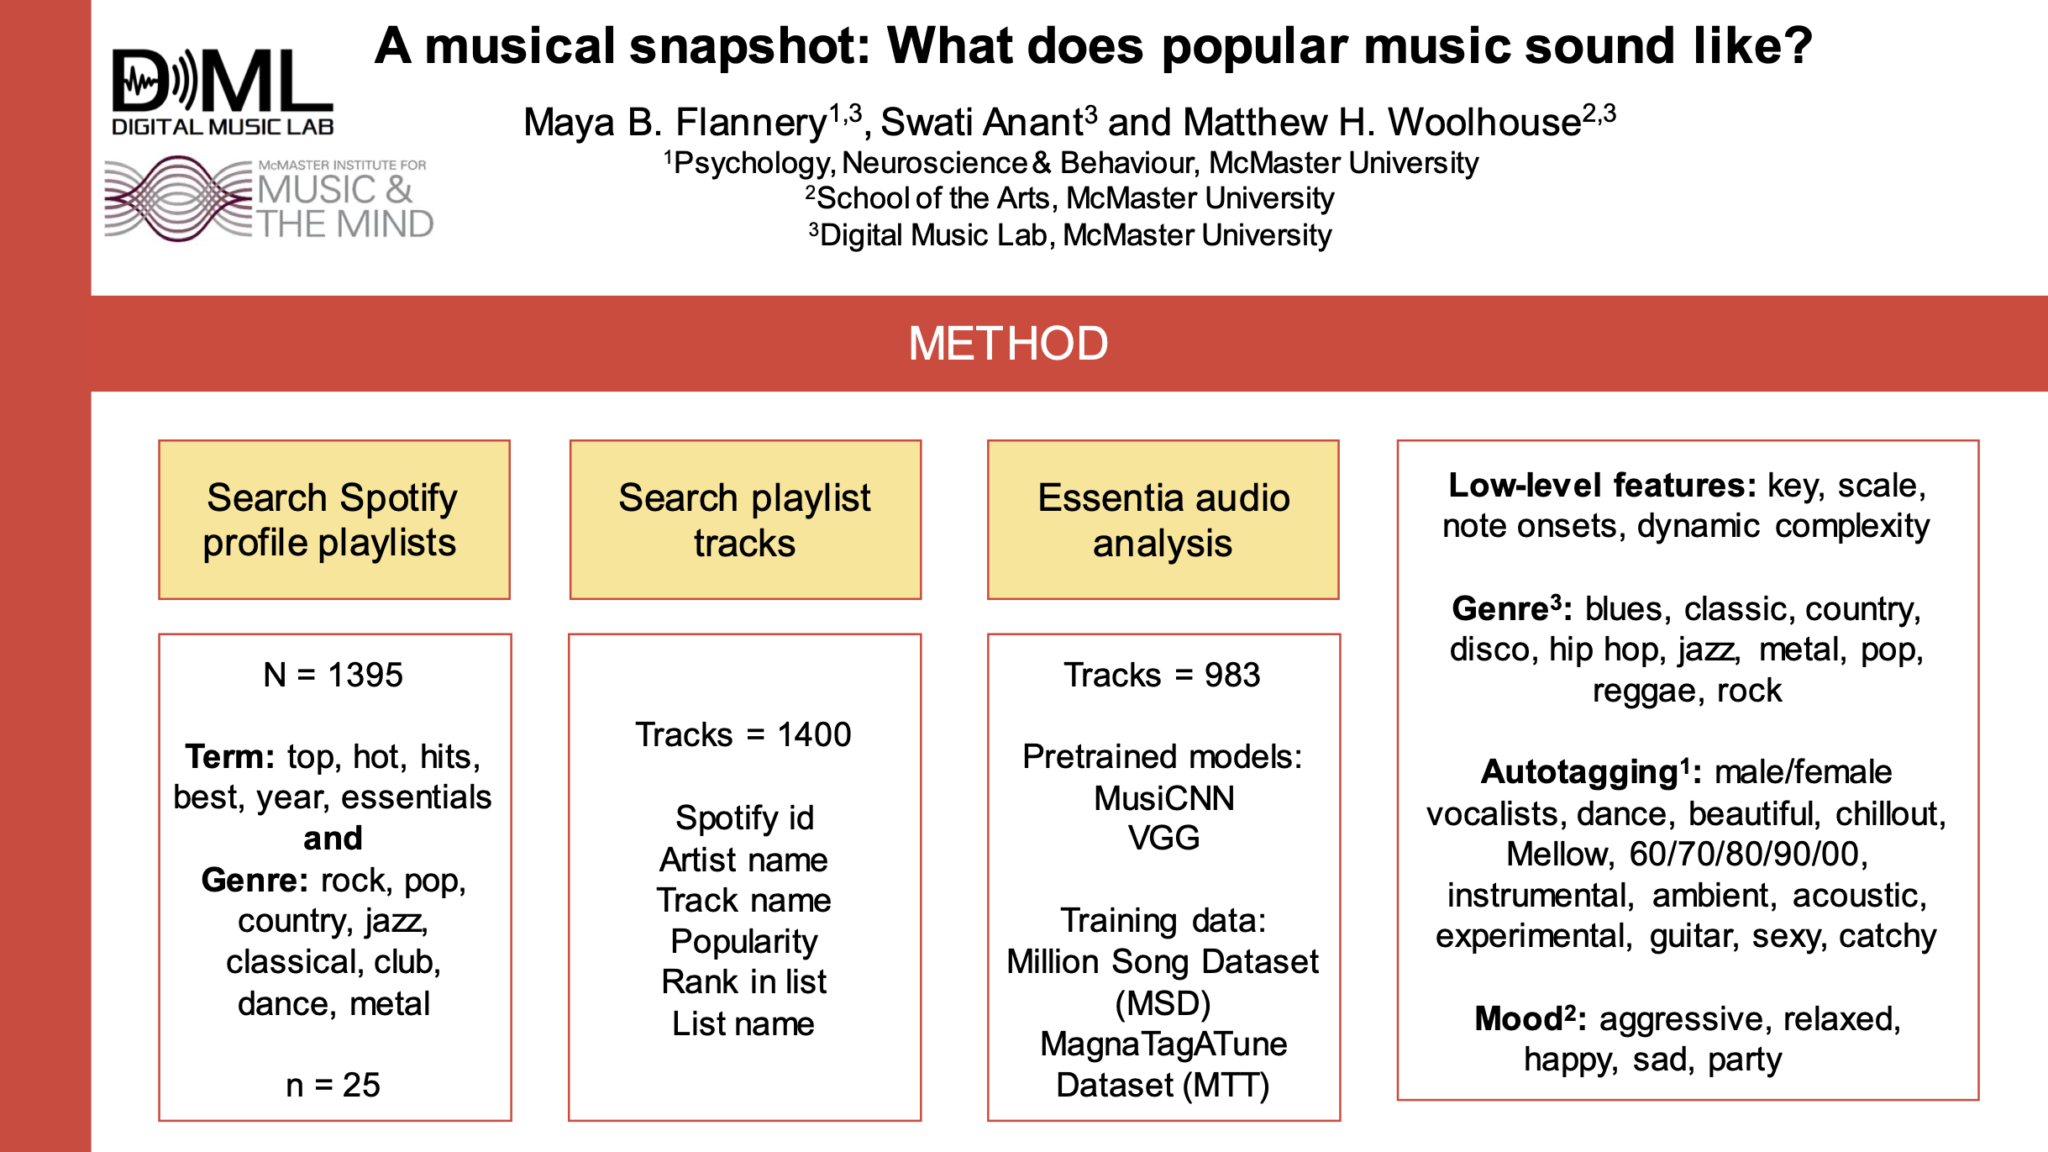 Part of the digital poster for "A musical snapshot: What does popular music sound like?" by Maya B. Flannery, Swati Anant, and Matthew H. Woolhouse. This slide goes over the methods.